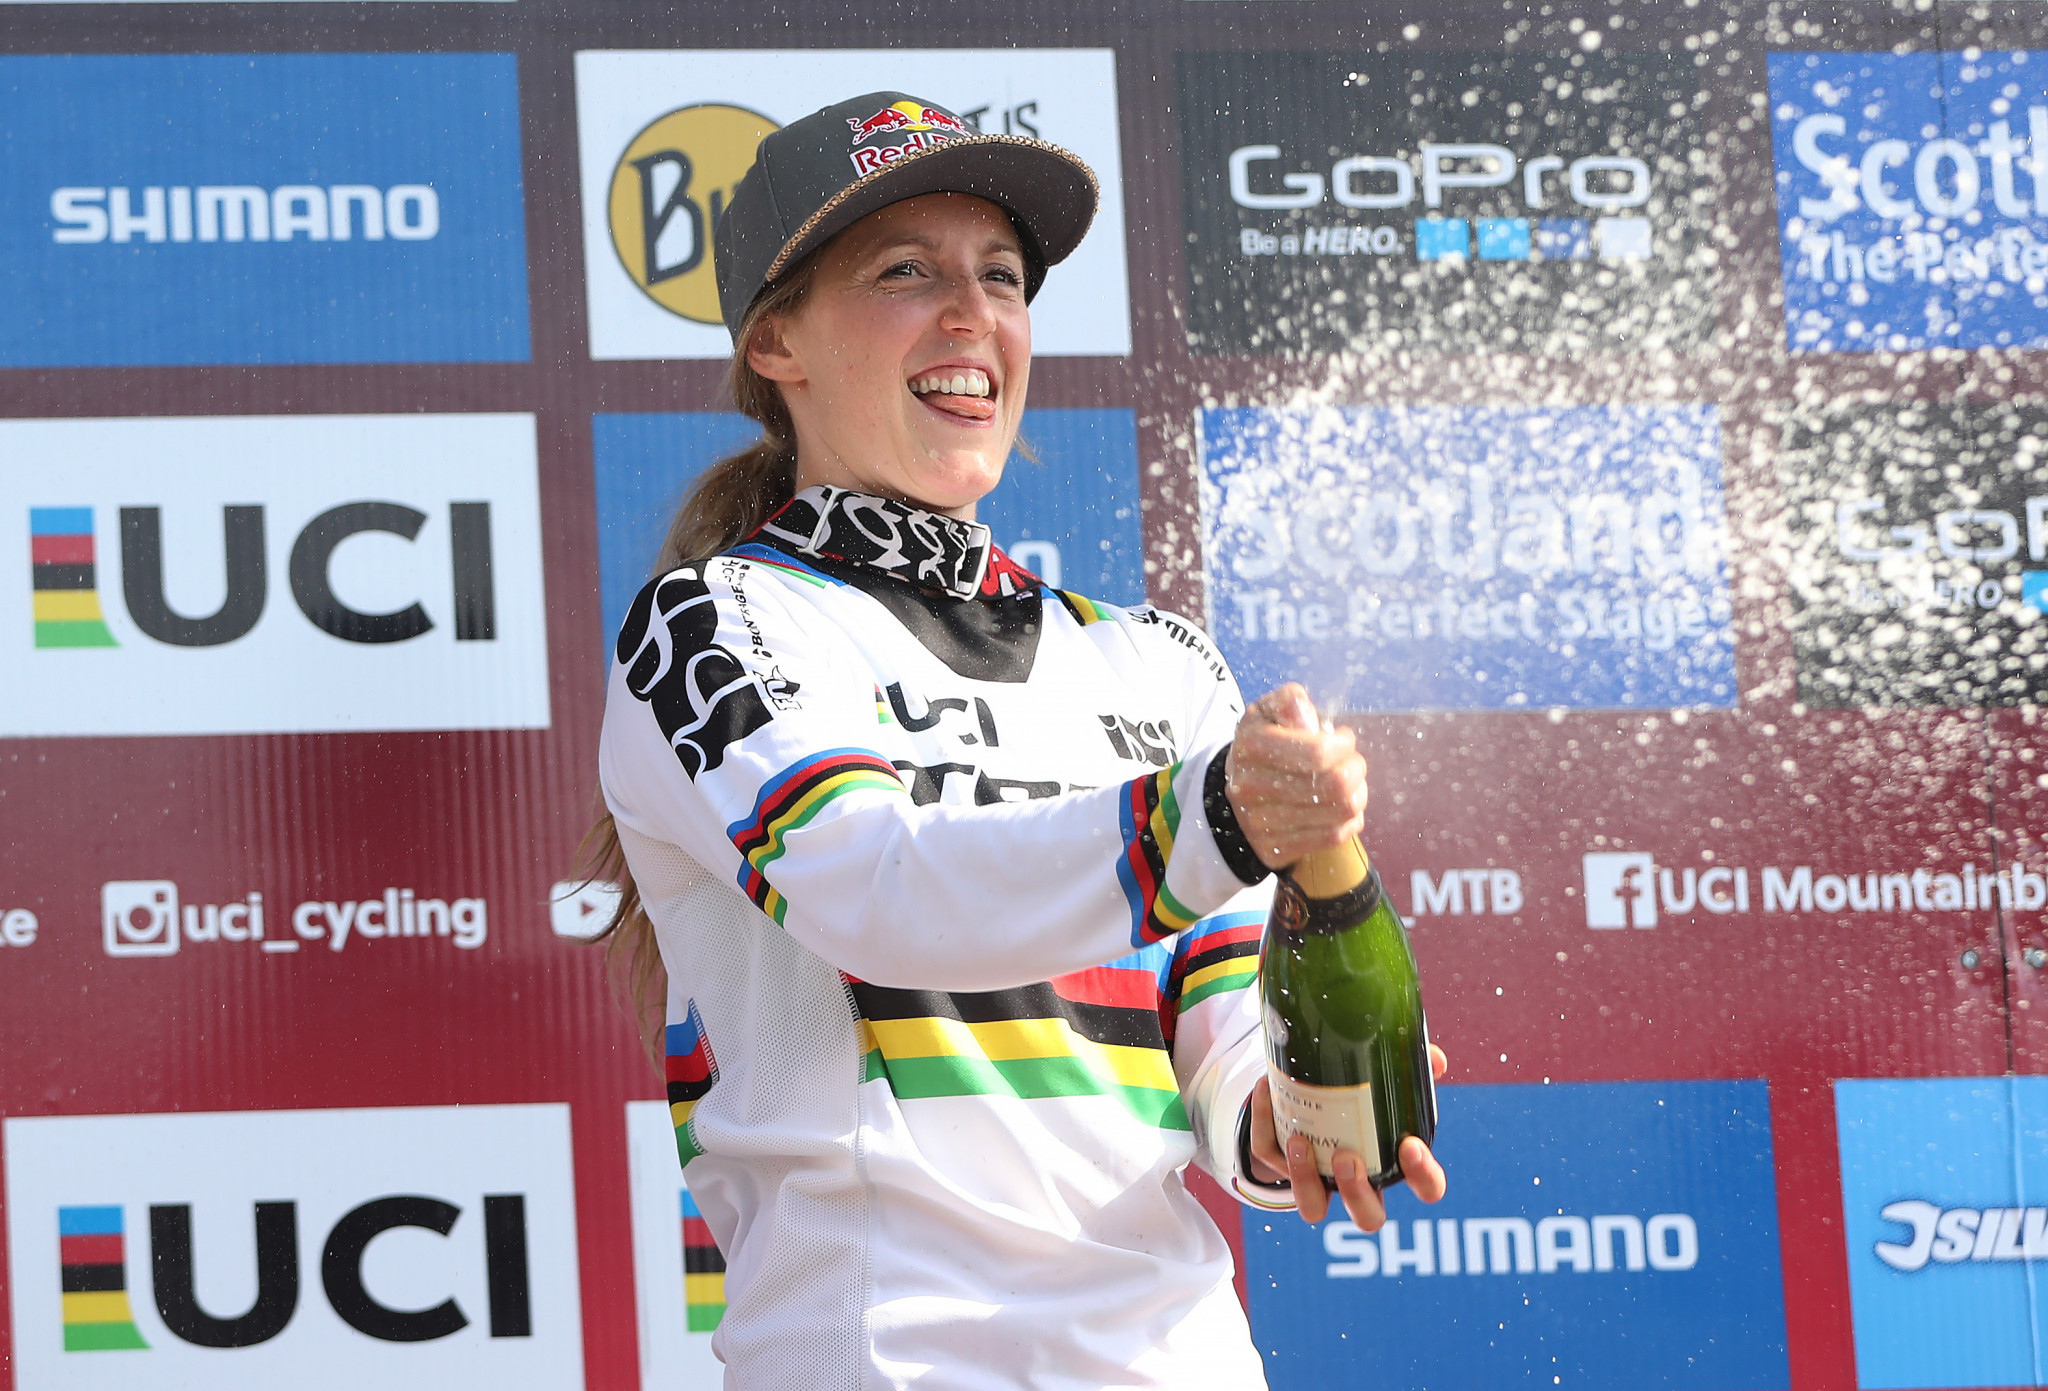 Atherton wins fifth downhill gold at Mountain Bike World Championship as Bruni defends men's title